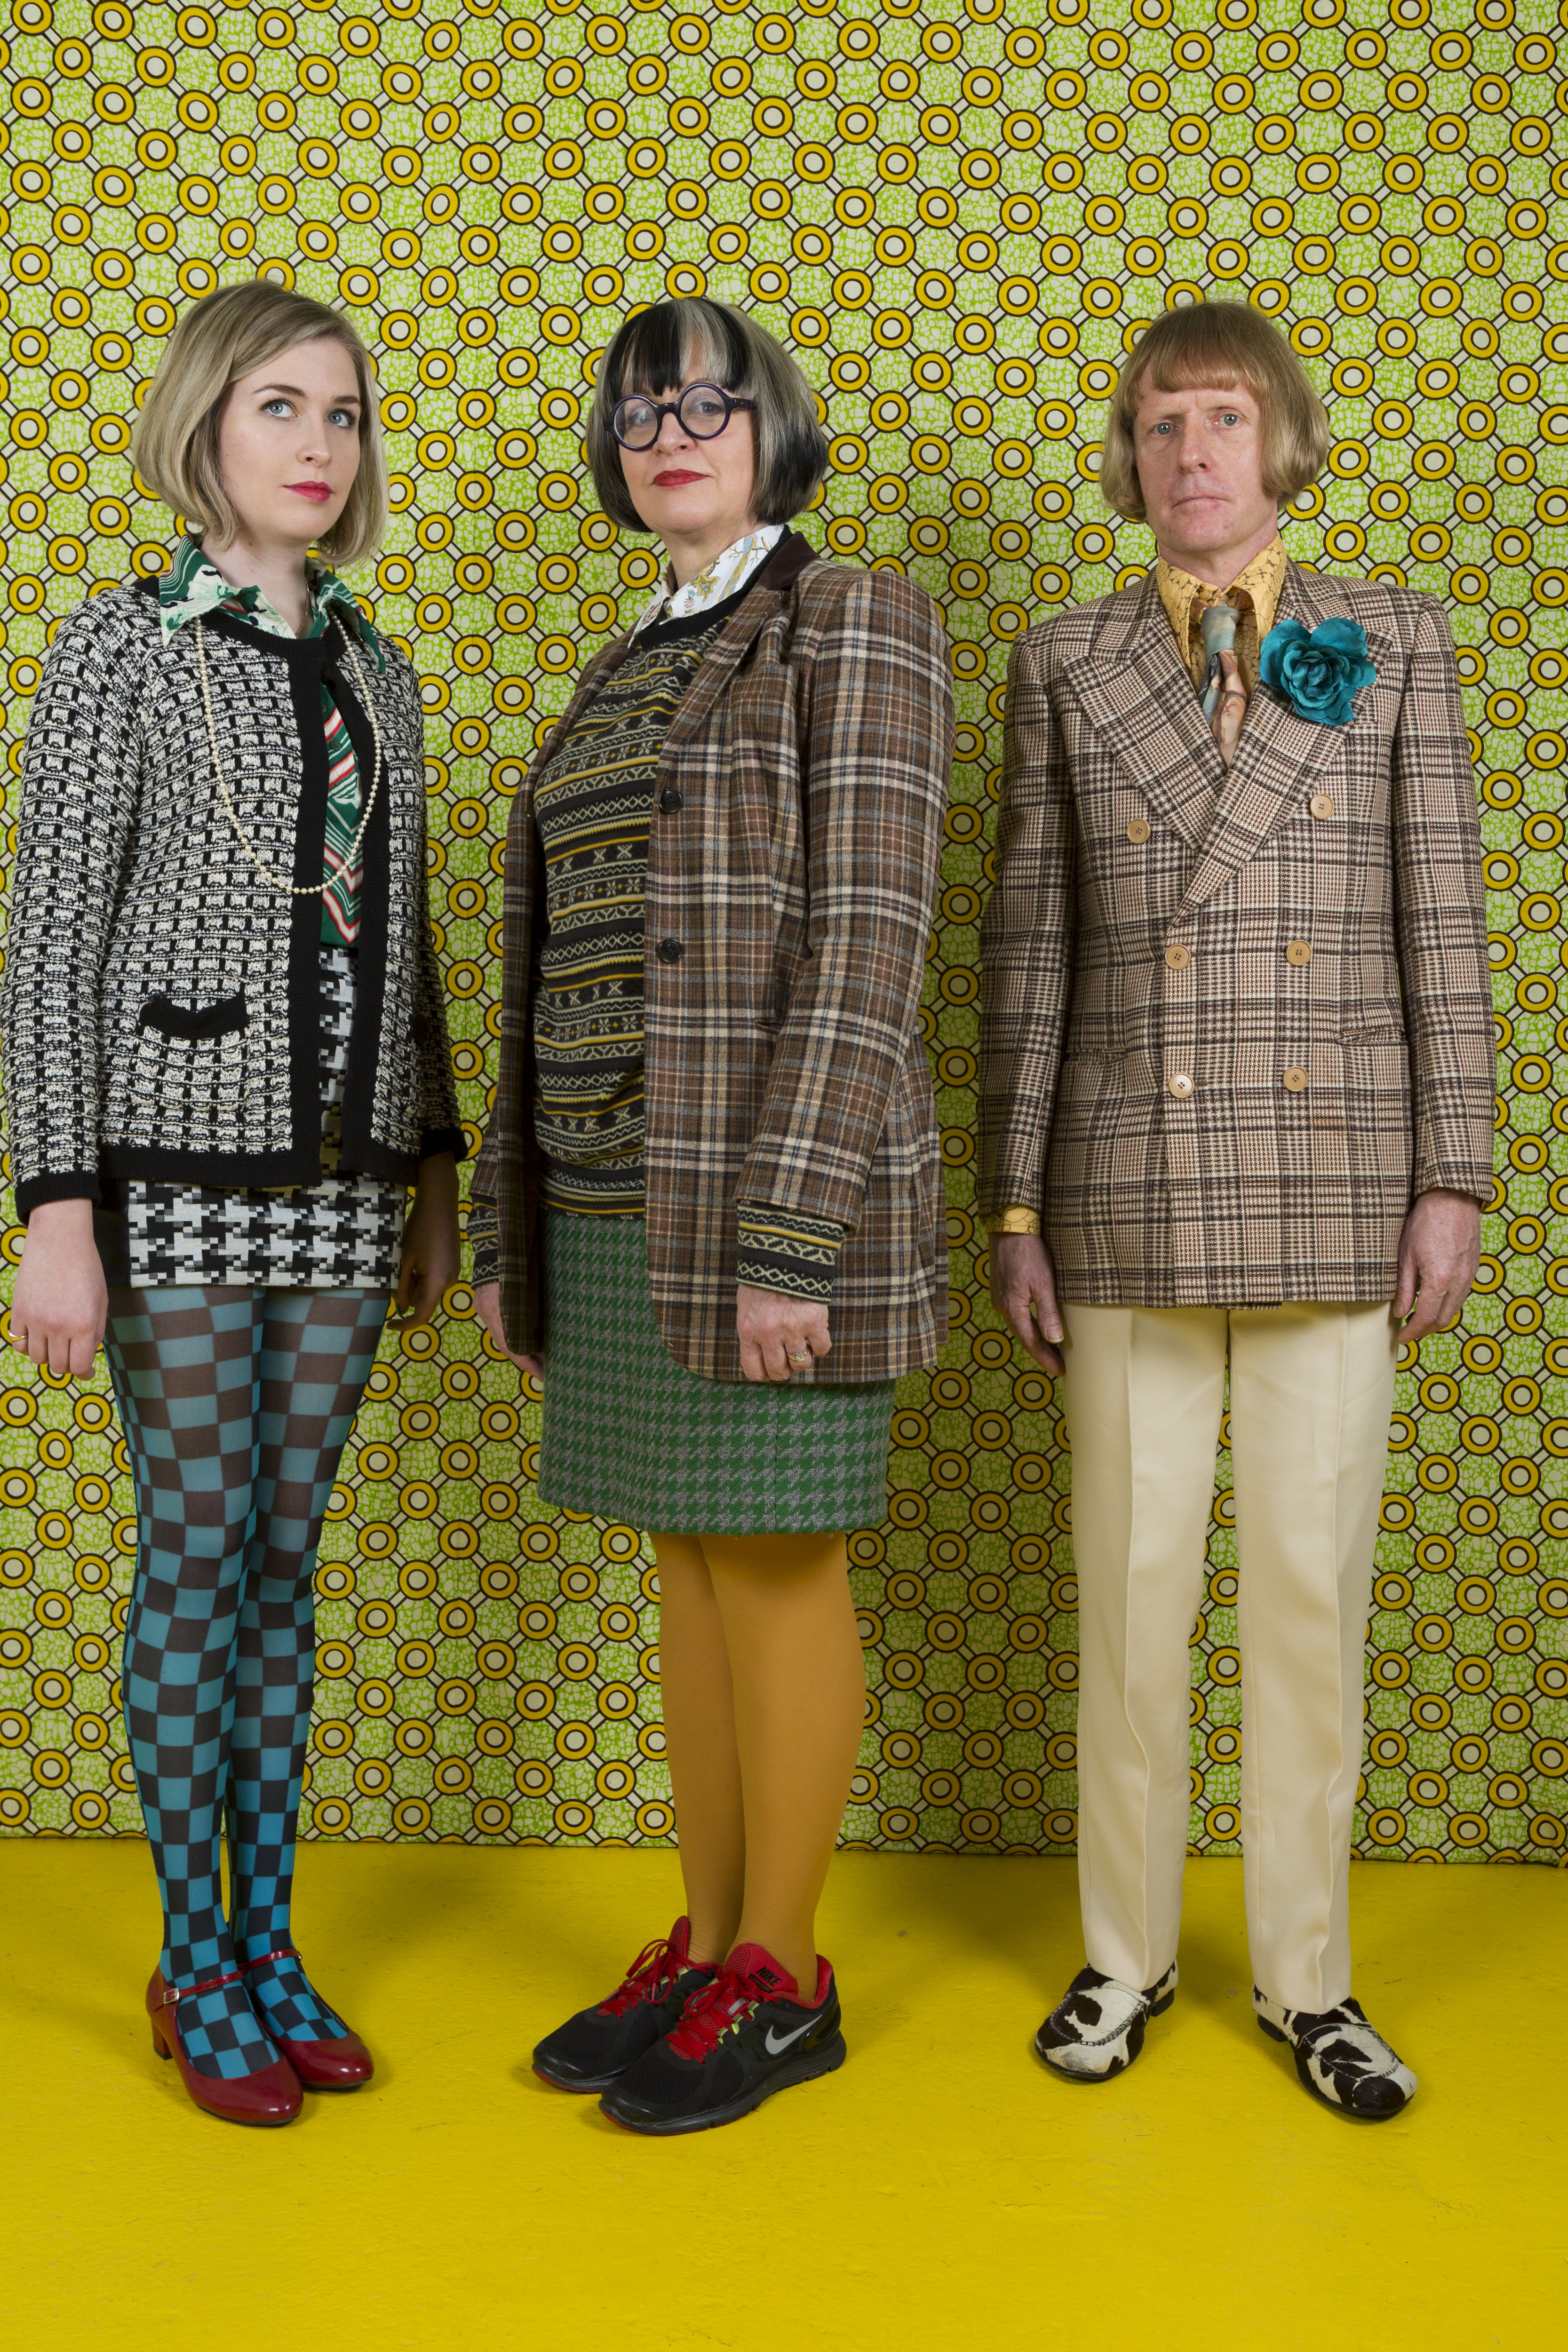 Grayson Perry with his wife Philippa and daughter Florence (Martin Parr/Magnum Photos/Rocket Gallery)